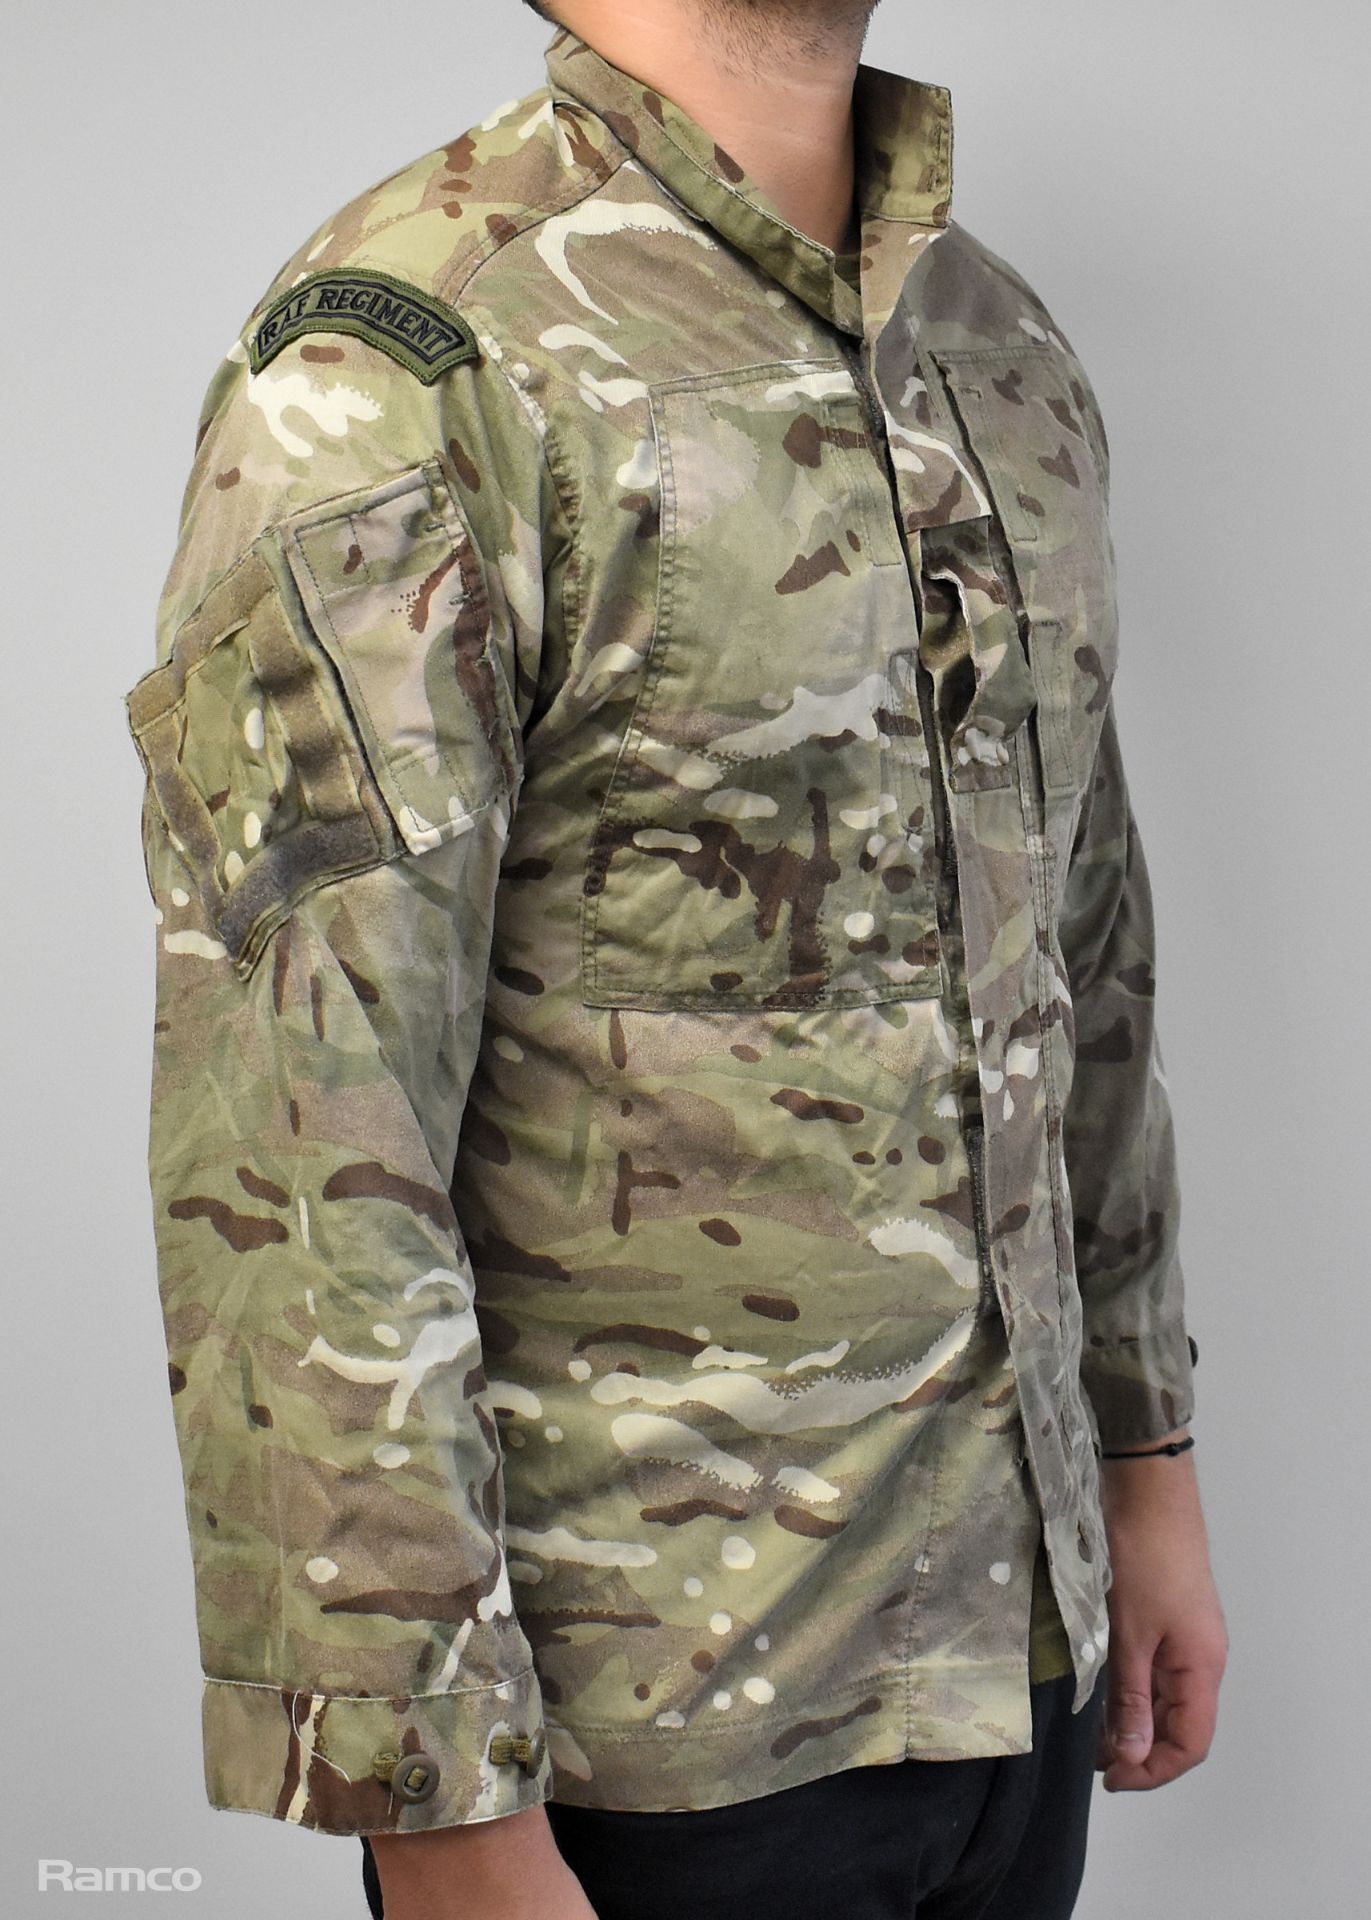 50x British Army MTP Combat jackets mixed styles - mixed grades and sizes - Image 4 of 12